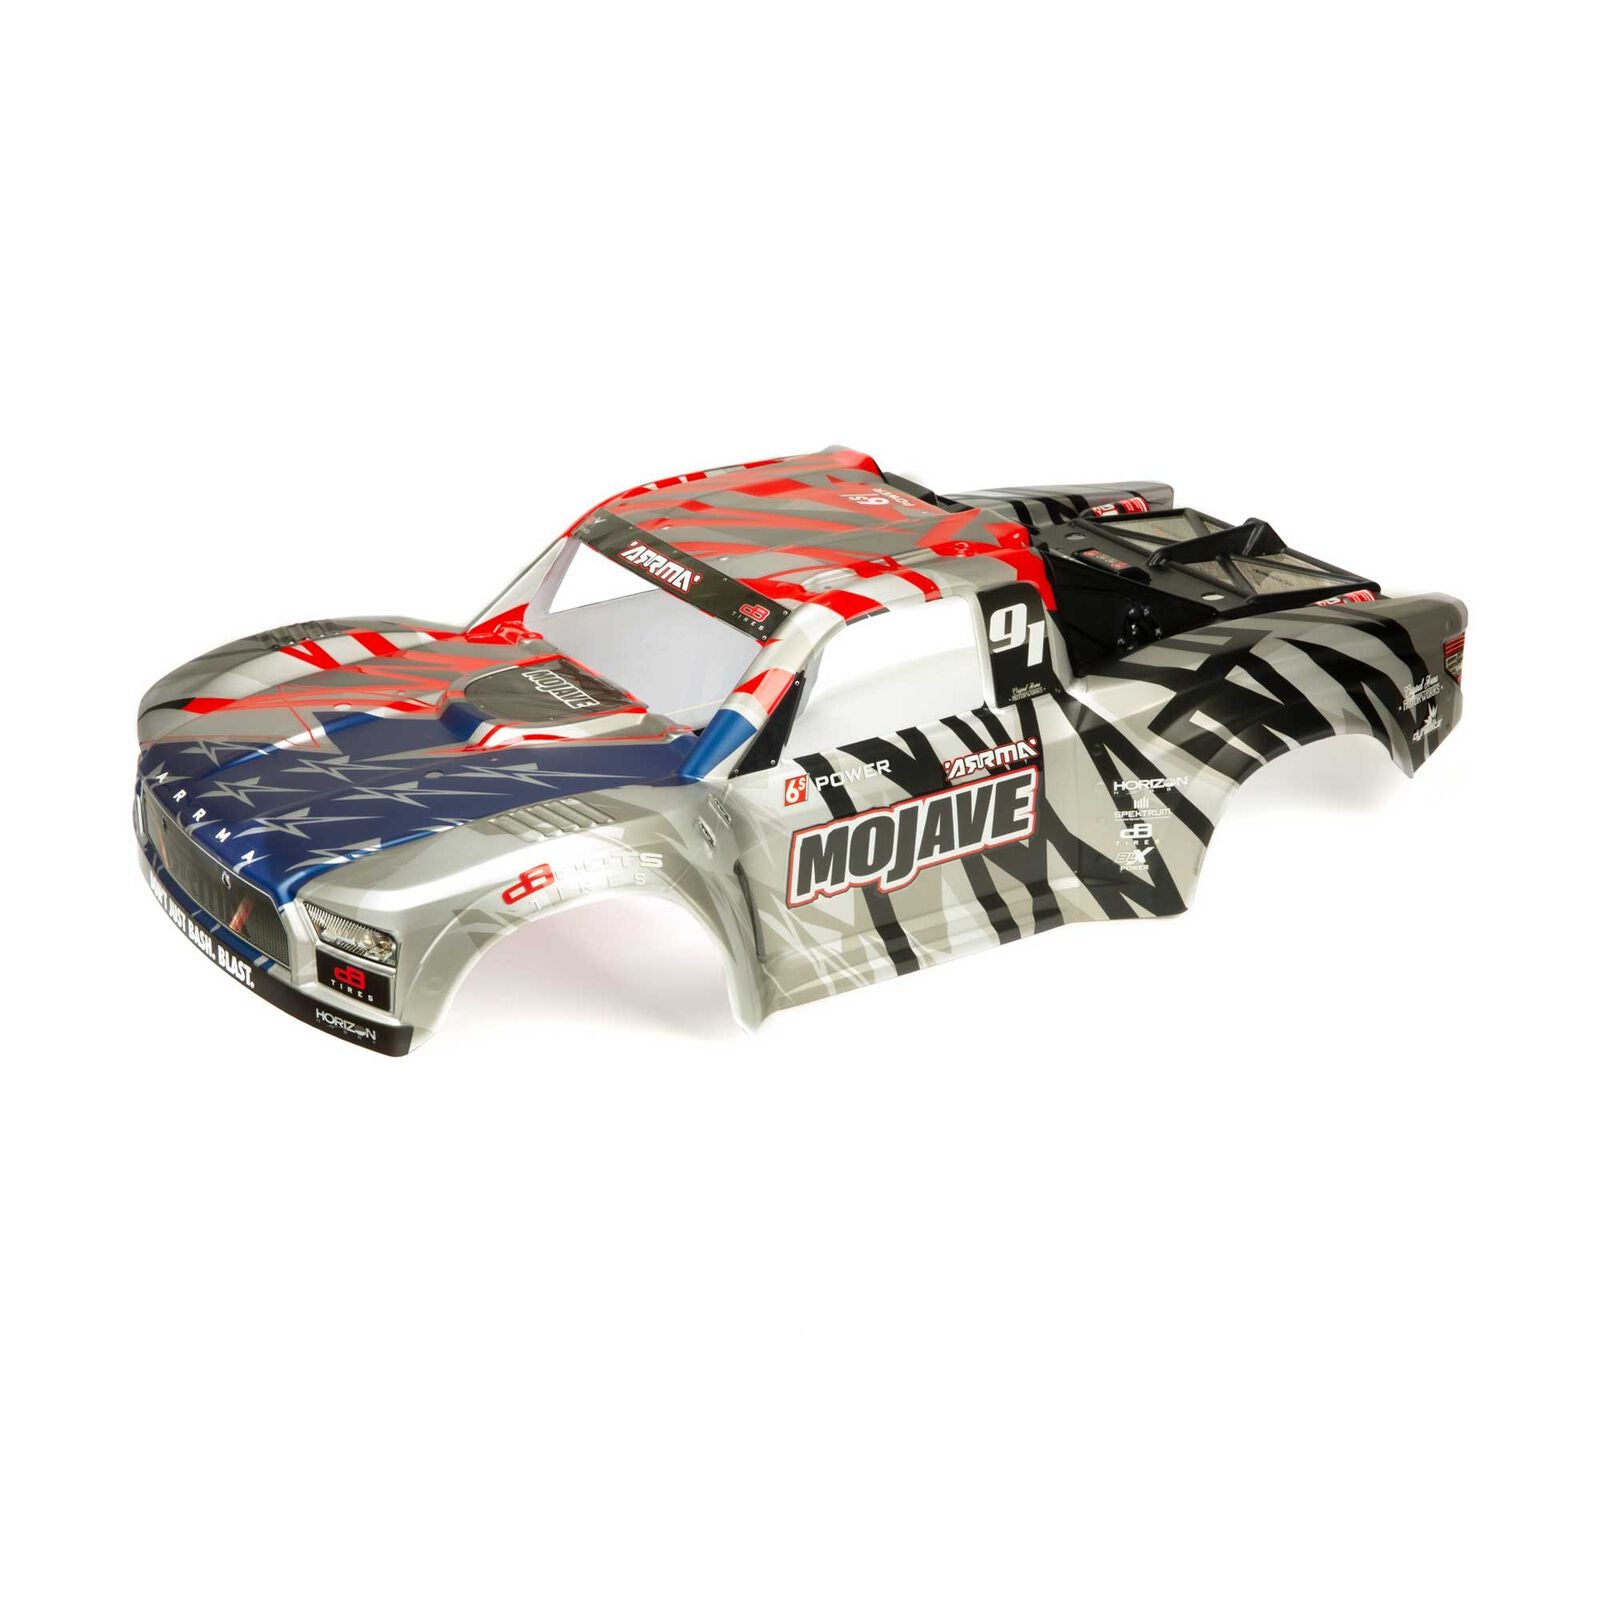 Arrma 1/7 Painted Body, Silver/Red: MOJAVE 6S BLX